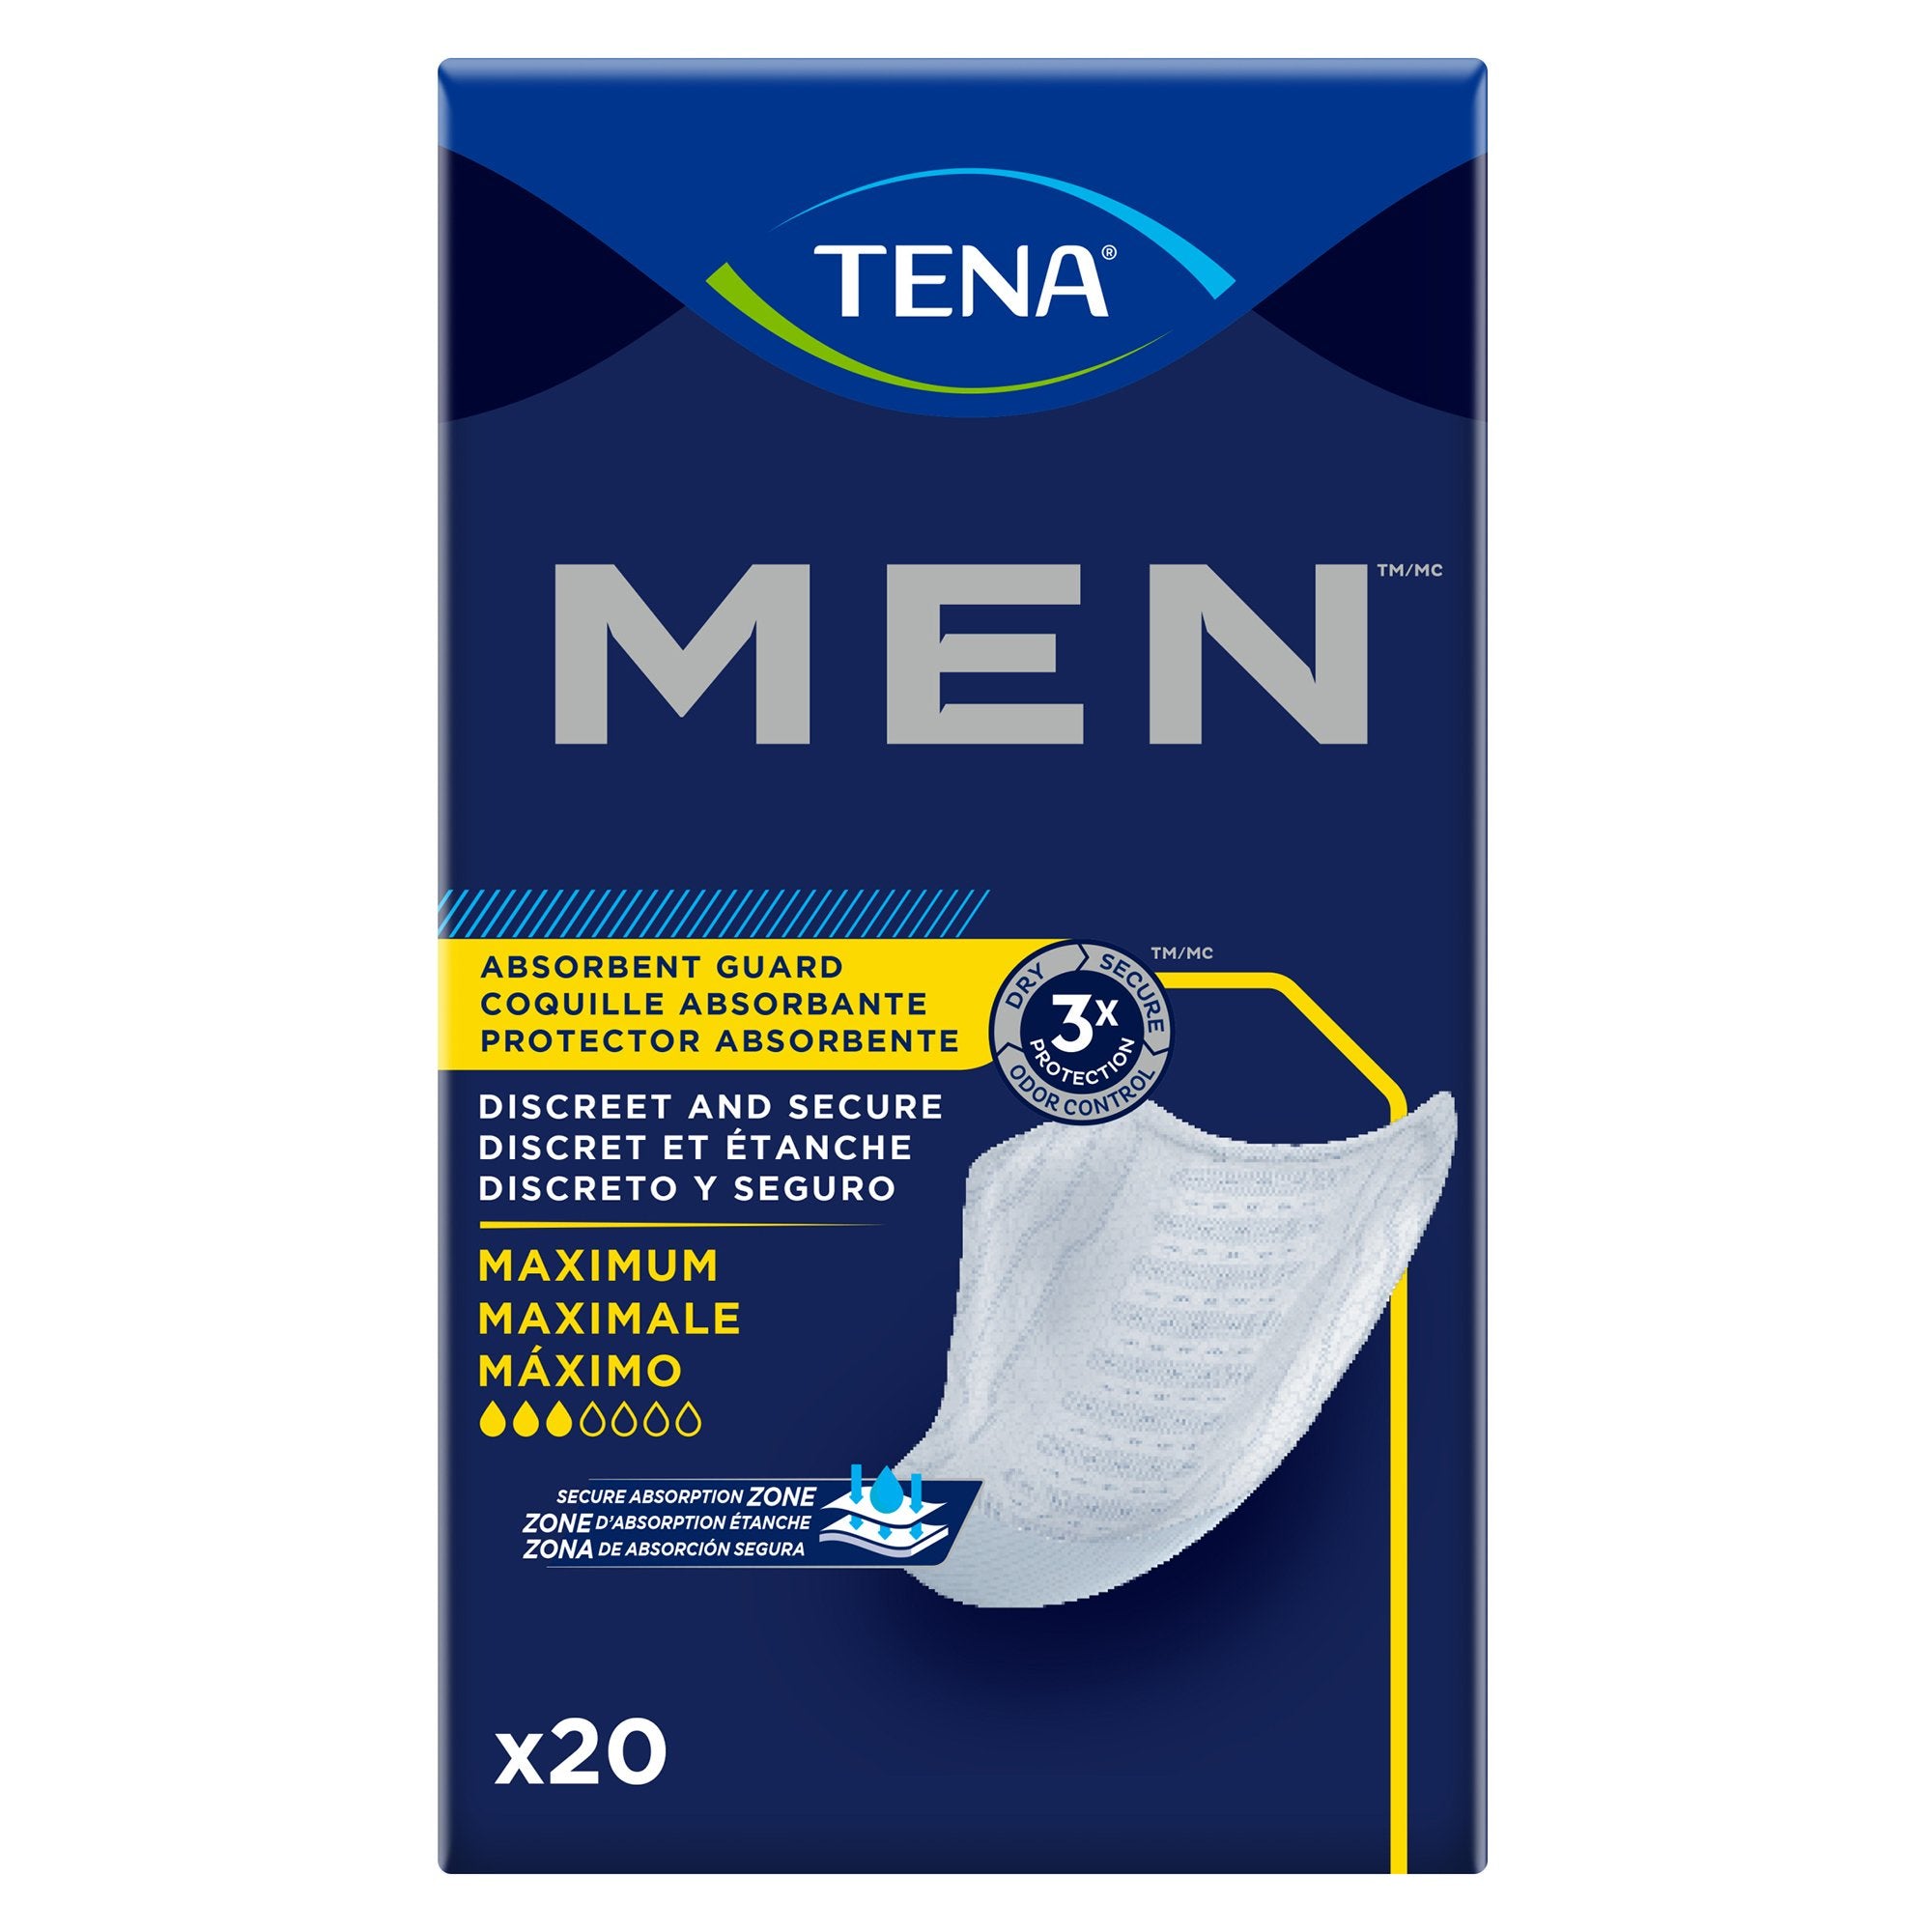 Bladder Control Pad TENA Men Moderate Guard 8 Inch Length Moderate Absorbency Dry-Fast Core One Size Fits Most